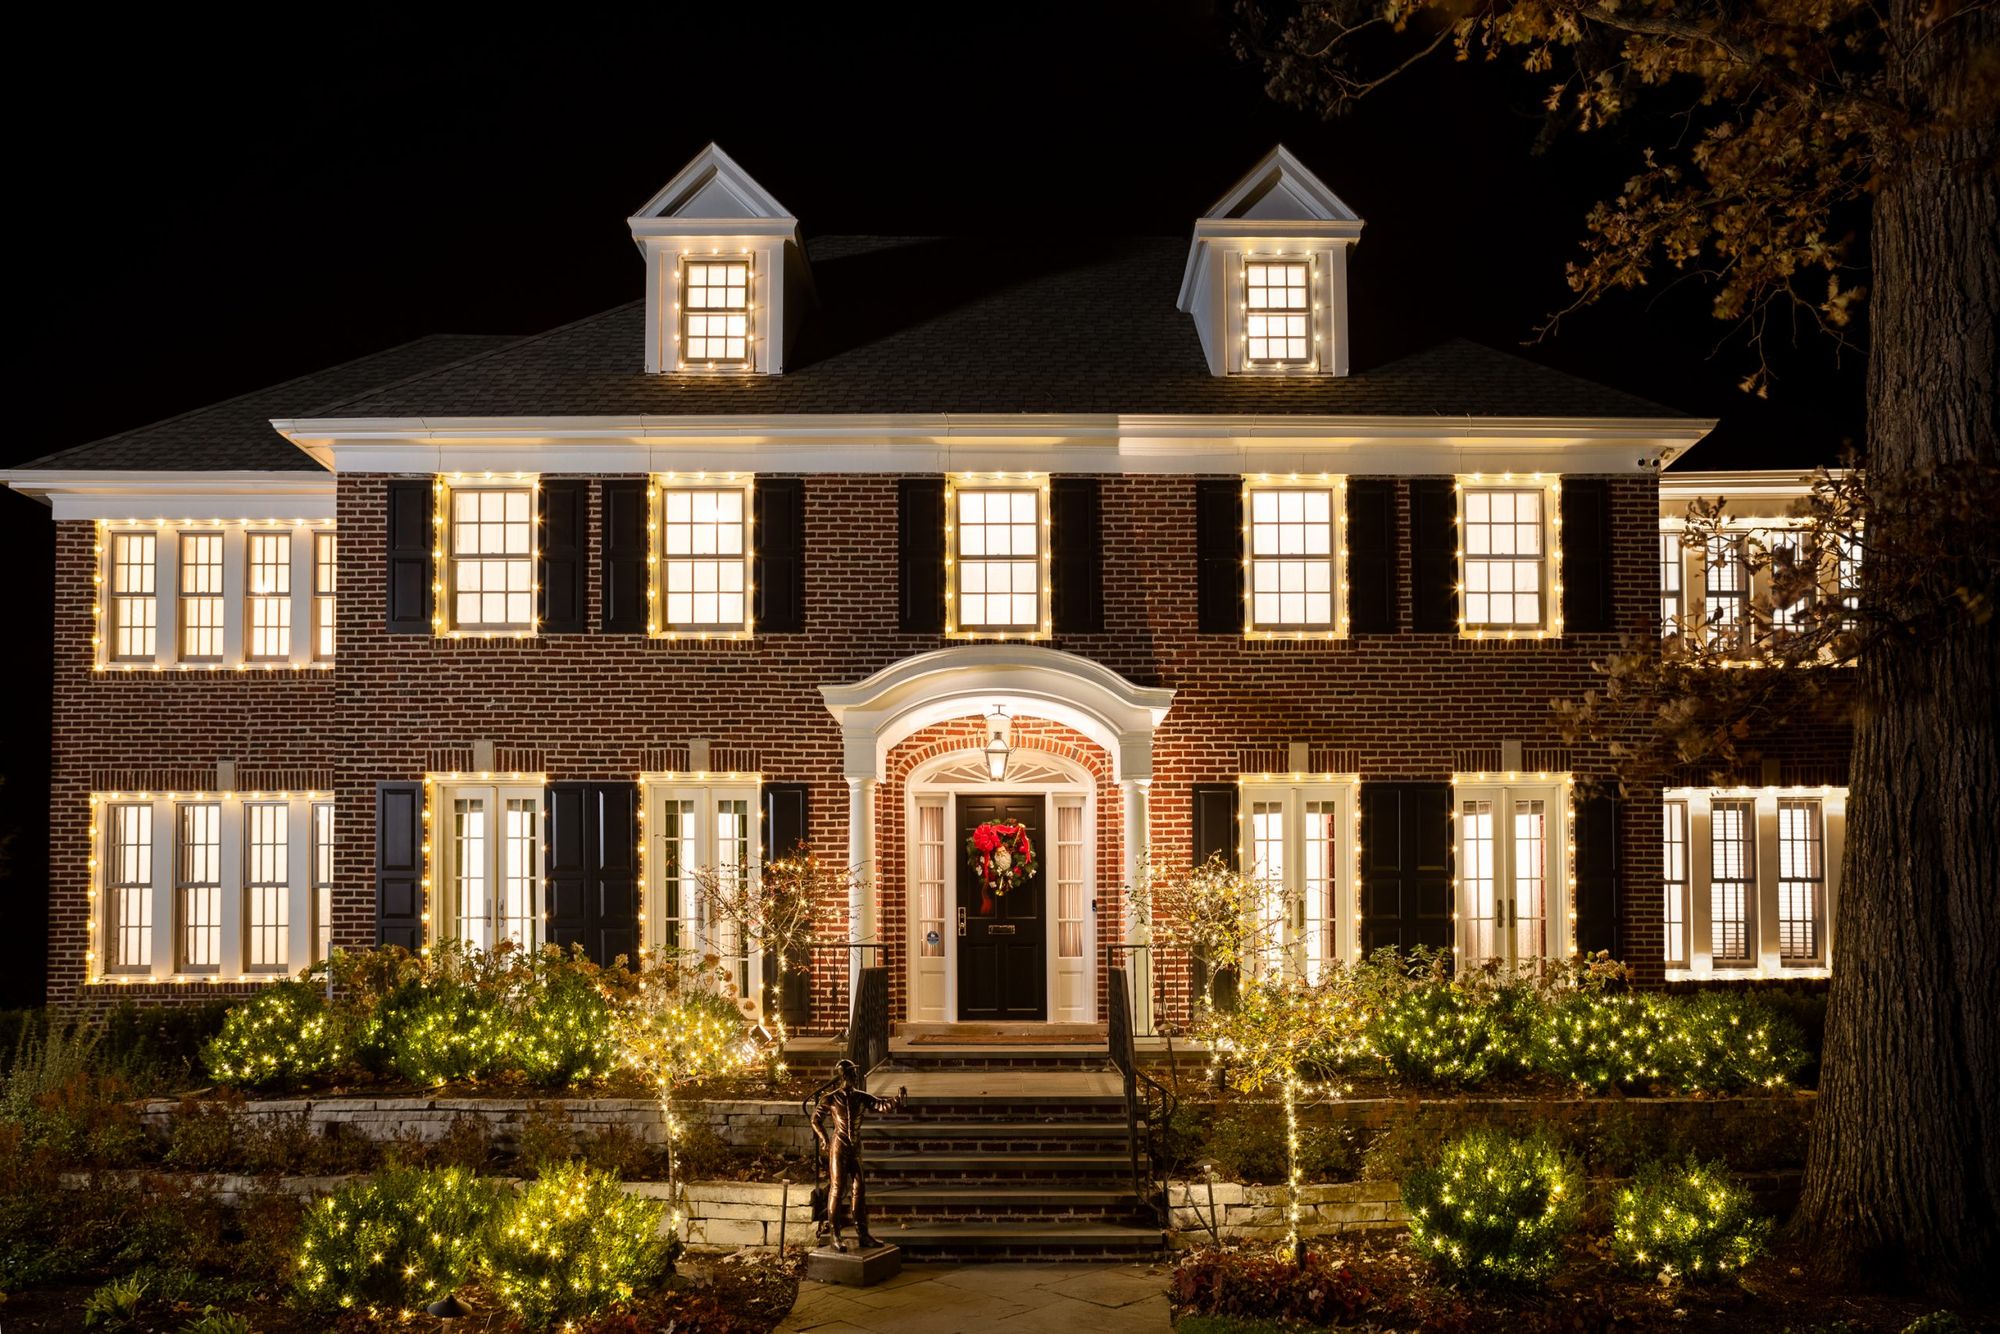 A Christmas wish come true—One night at the house of &#8216;Home alone'